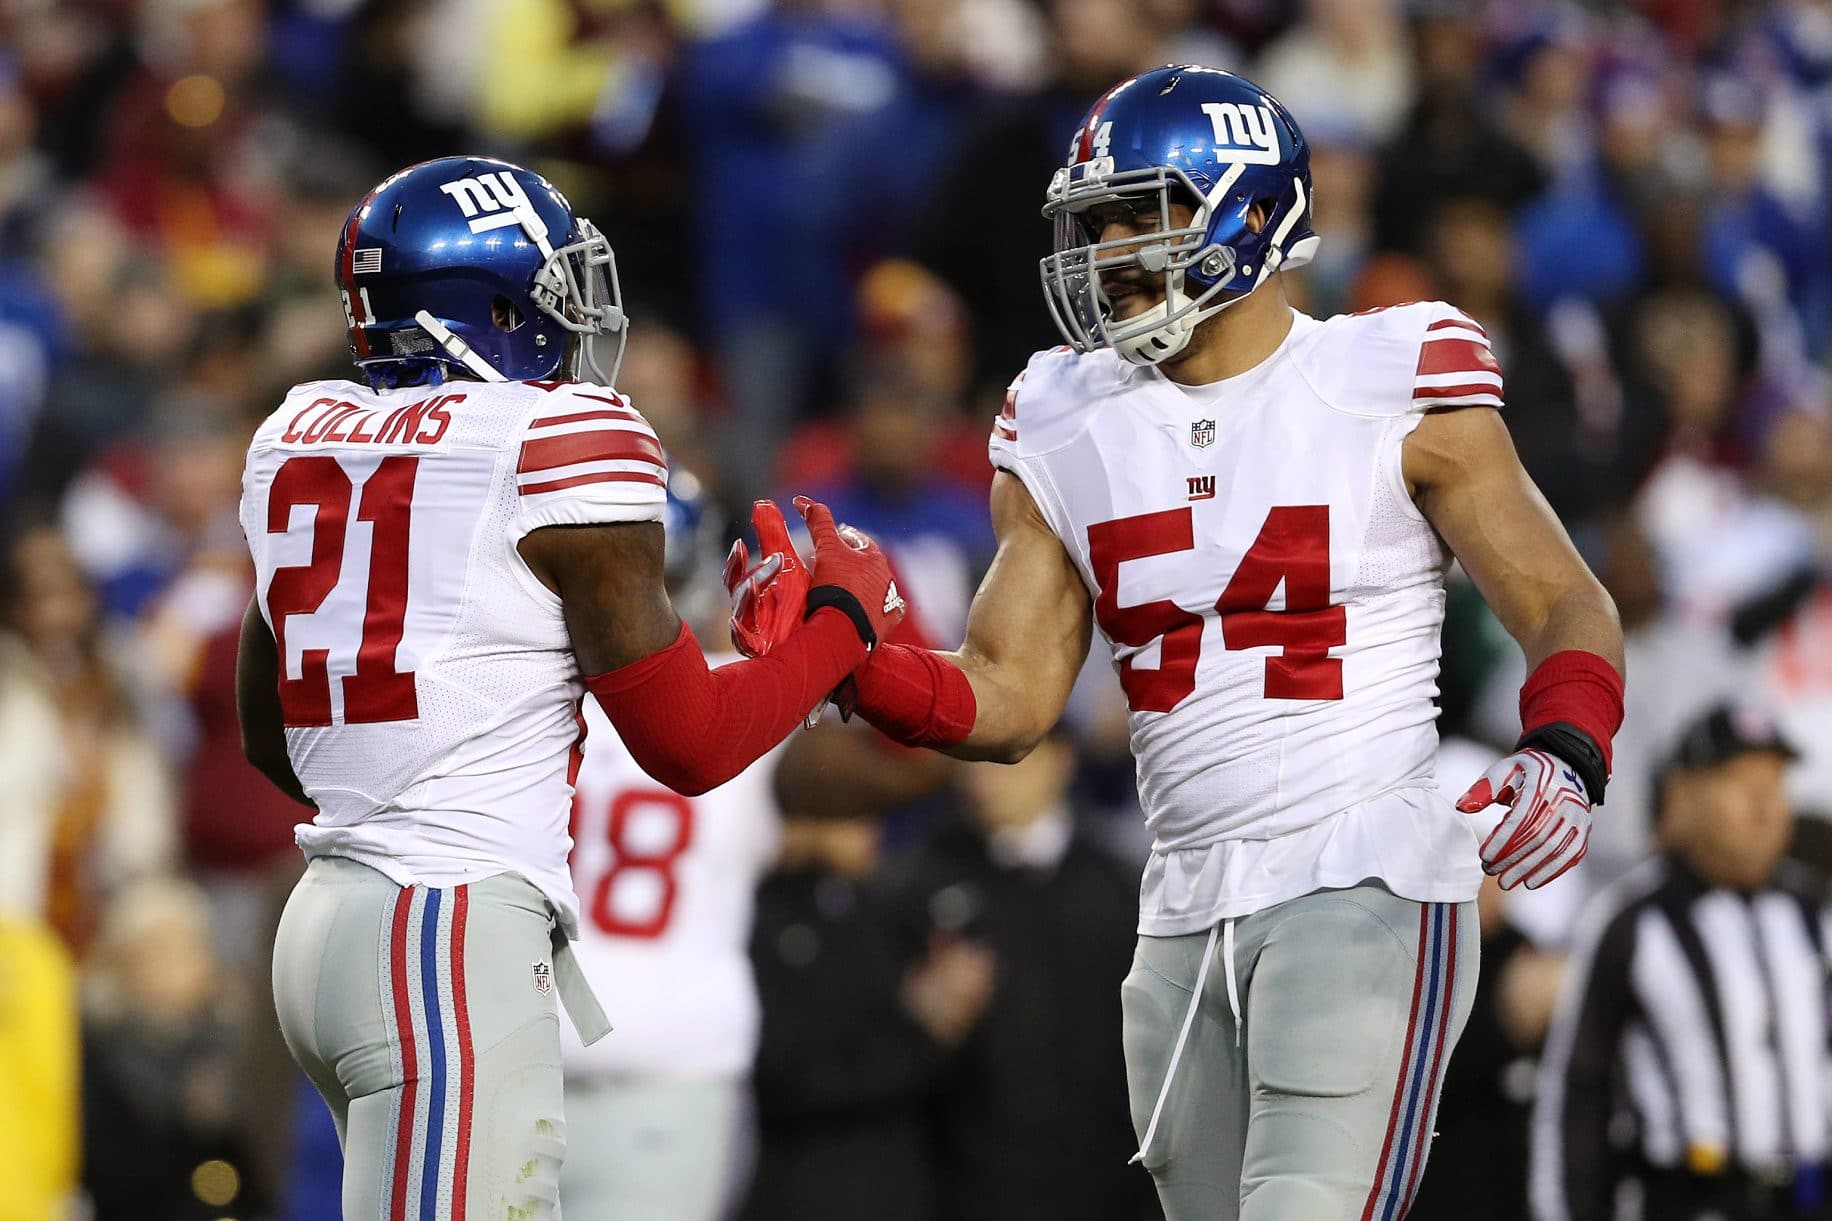 New York Giants Big Blue Bylines, 9/30/17: OBJ Fined, Goodson & Vernon Ready to Go 